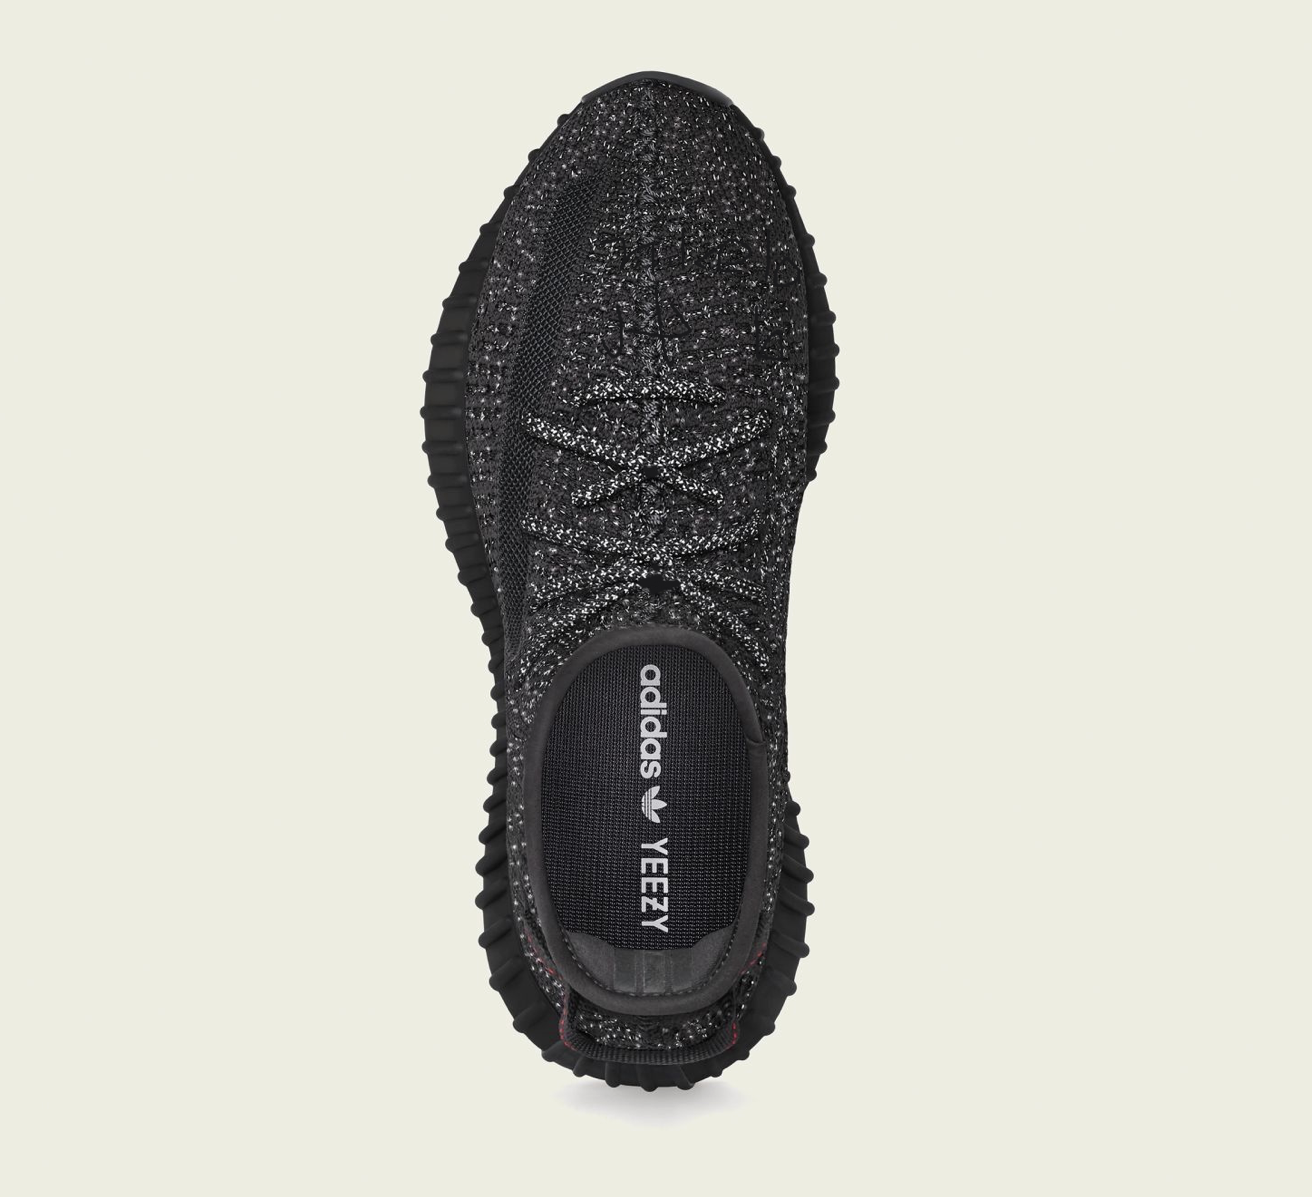 Yeezy bred - Yeezy Boost 350 V2 - Official Adidas Yeezy